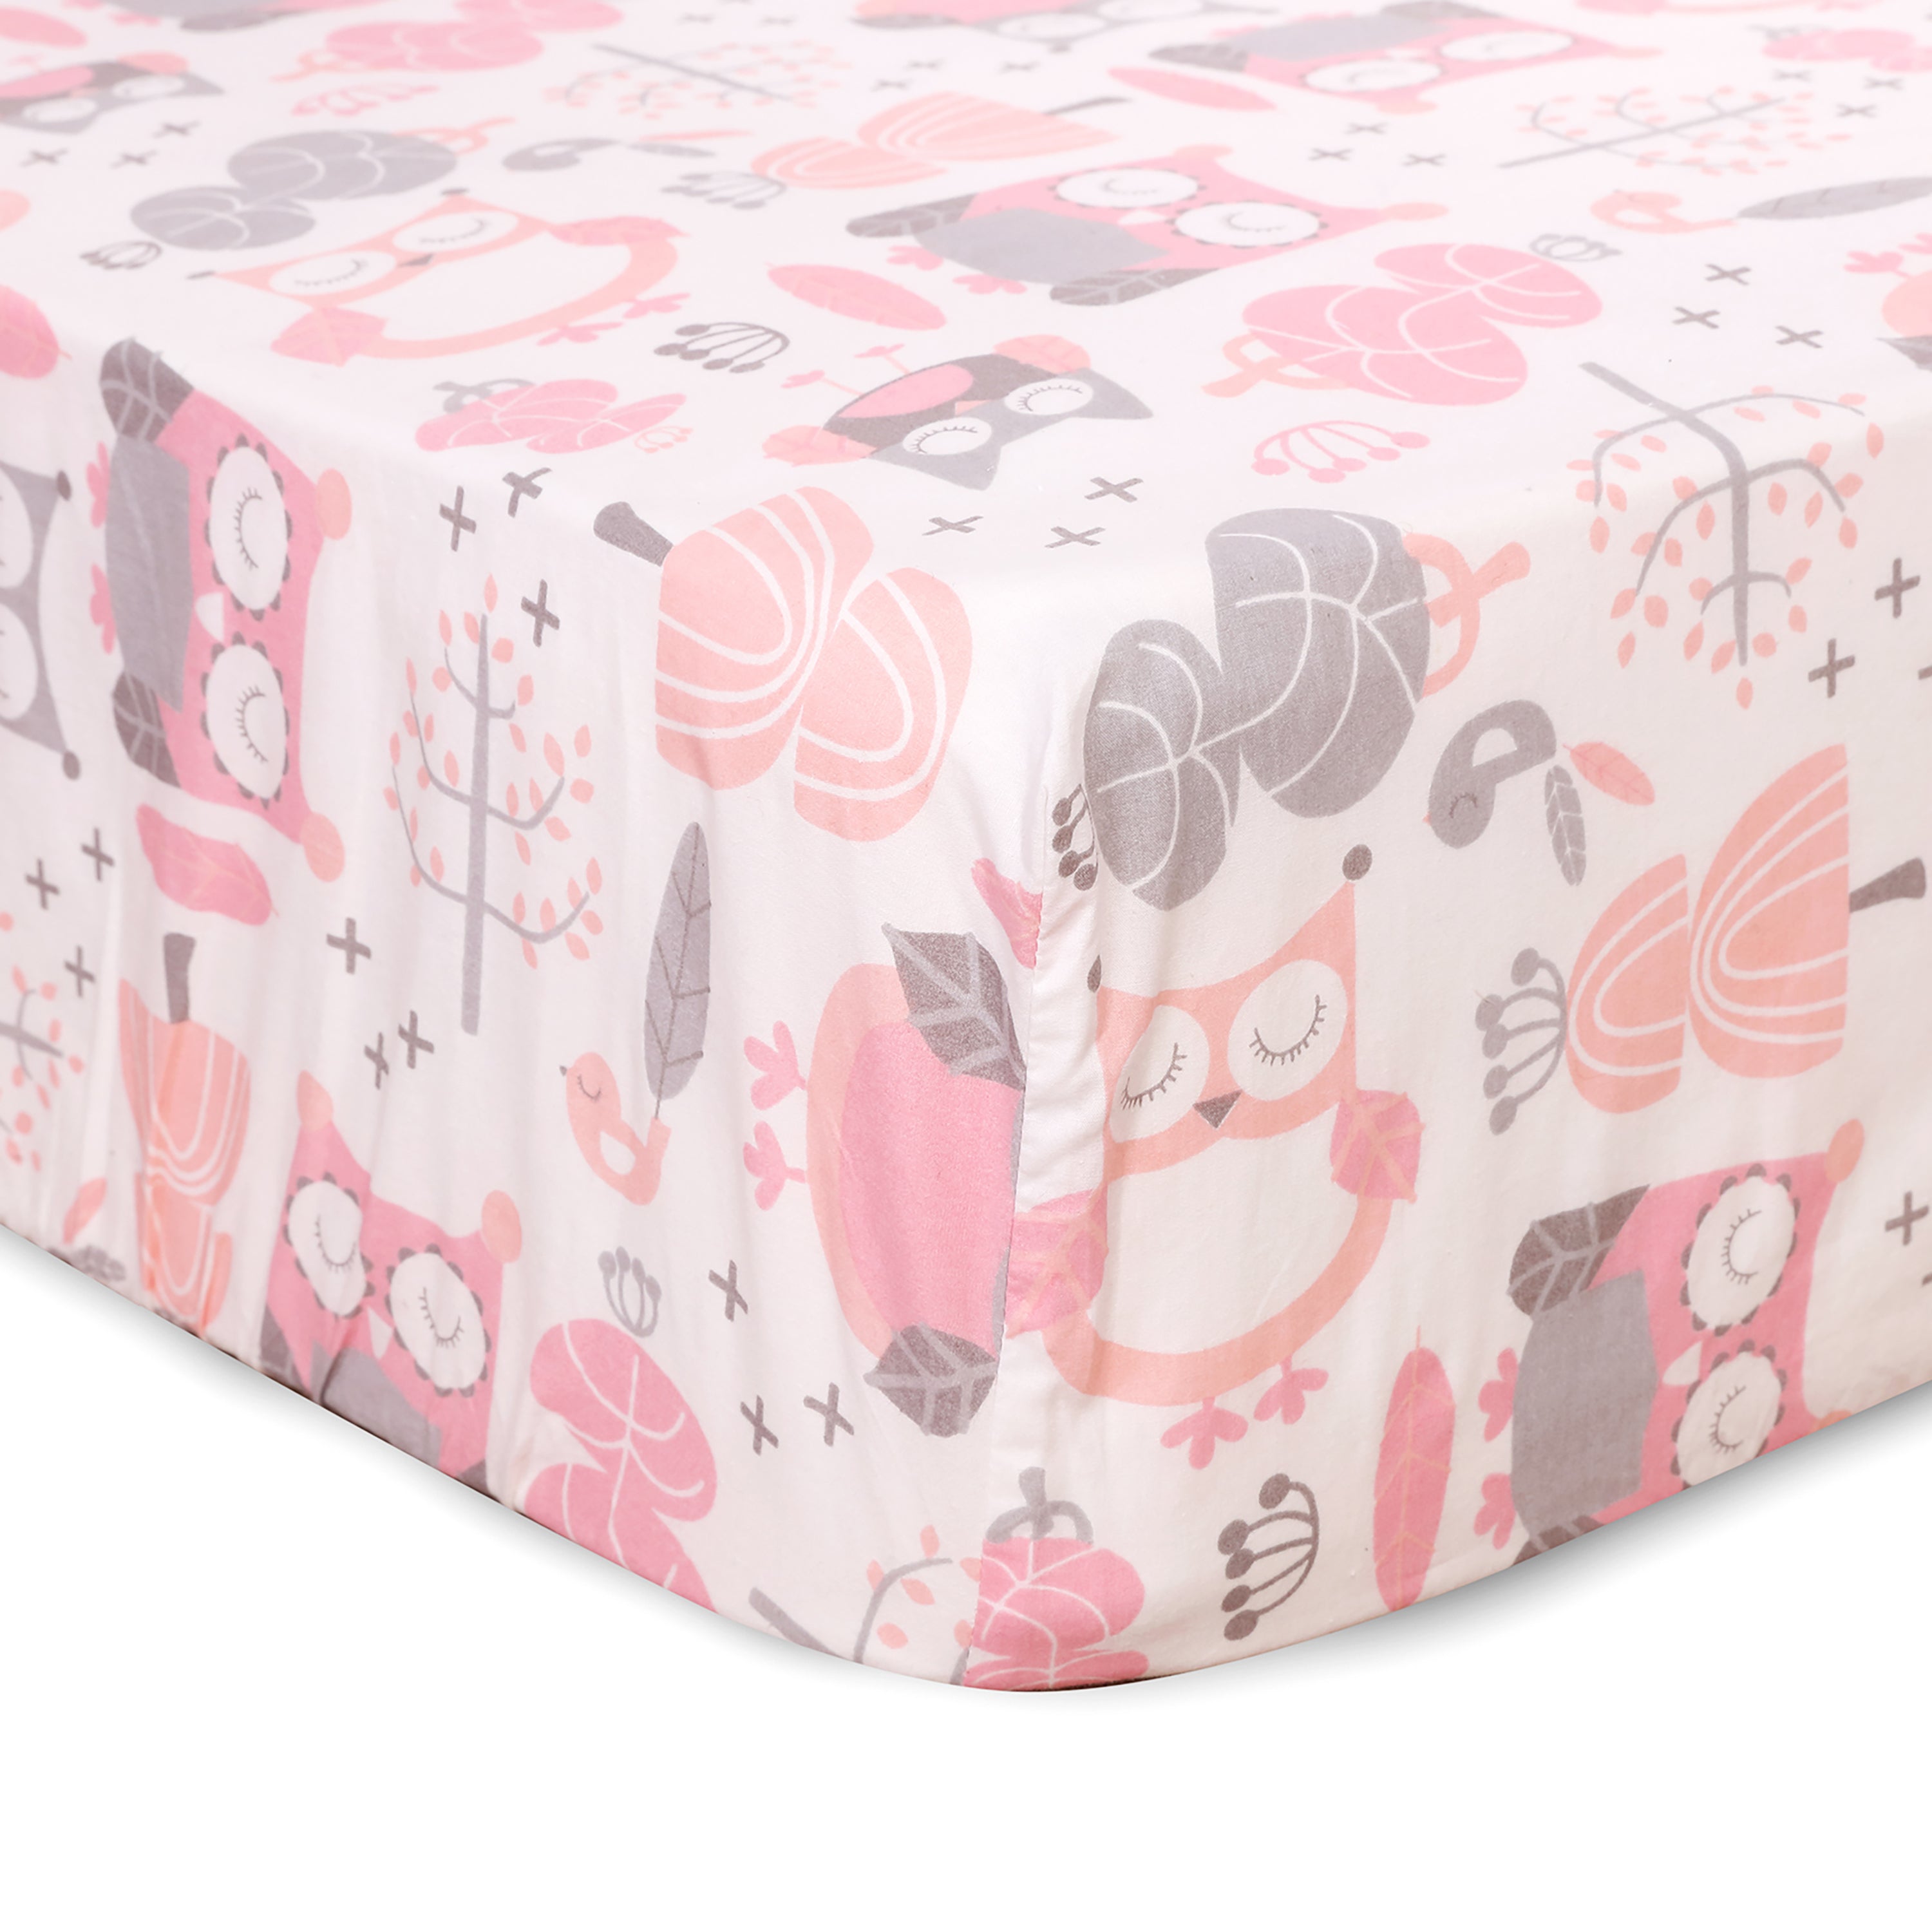 Night Owl Cotton Crib Fitted Sheet - Pink